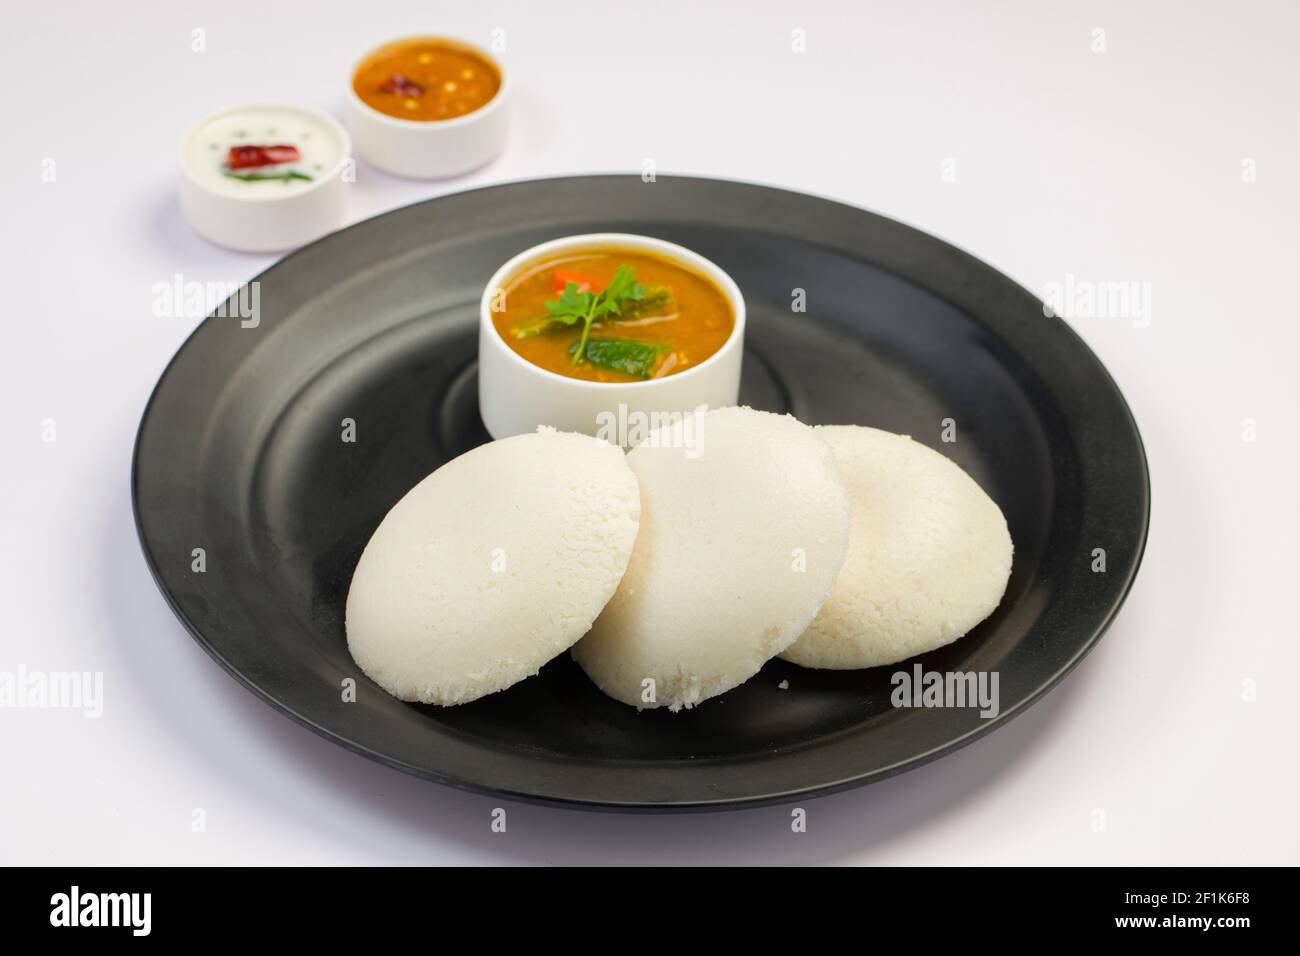 Idly or Idli, south indian main breakfast item which is beautifully arranged in a black plate on white background. Stock Photo